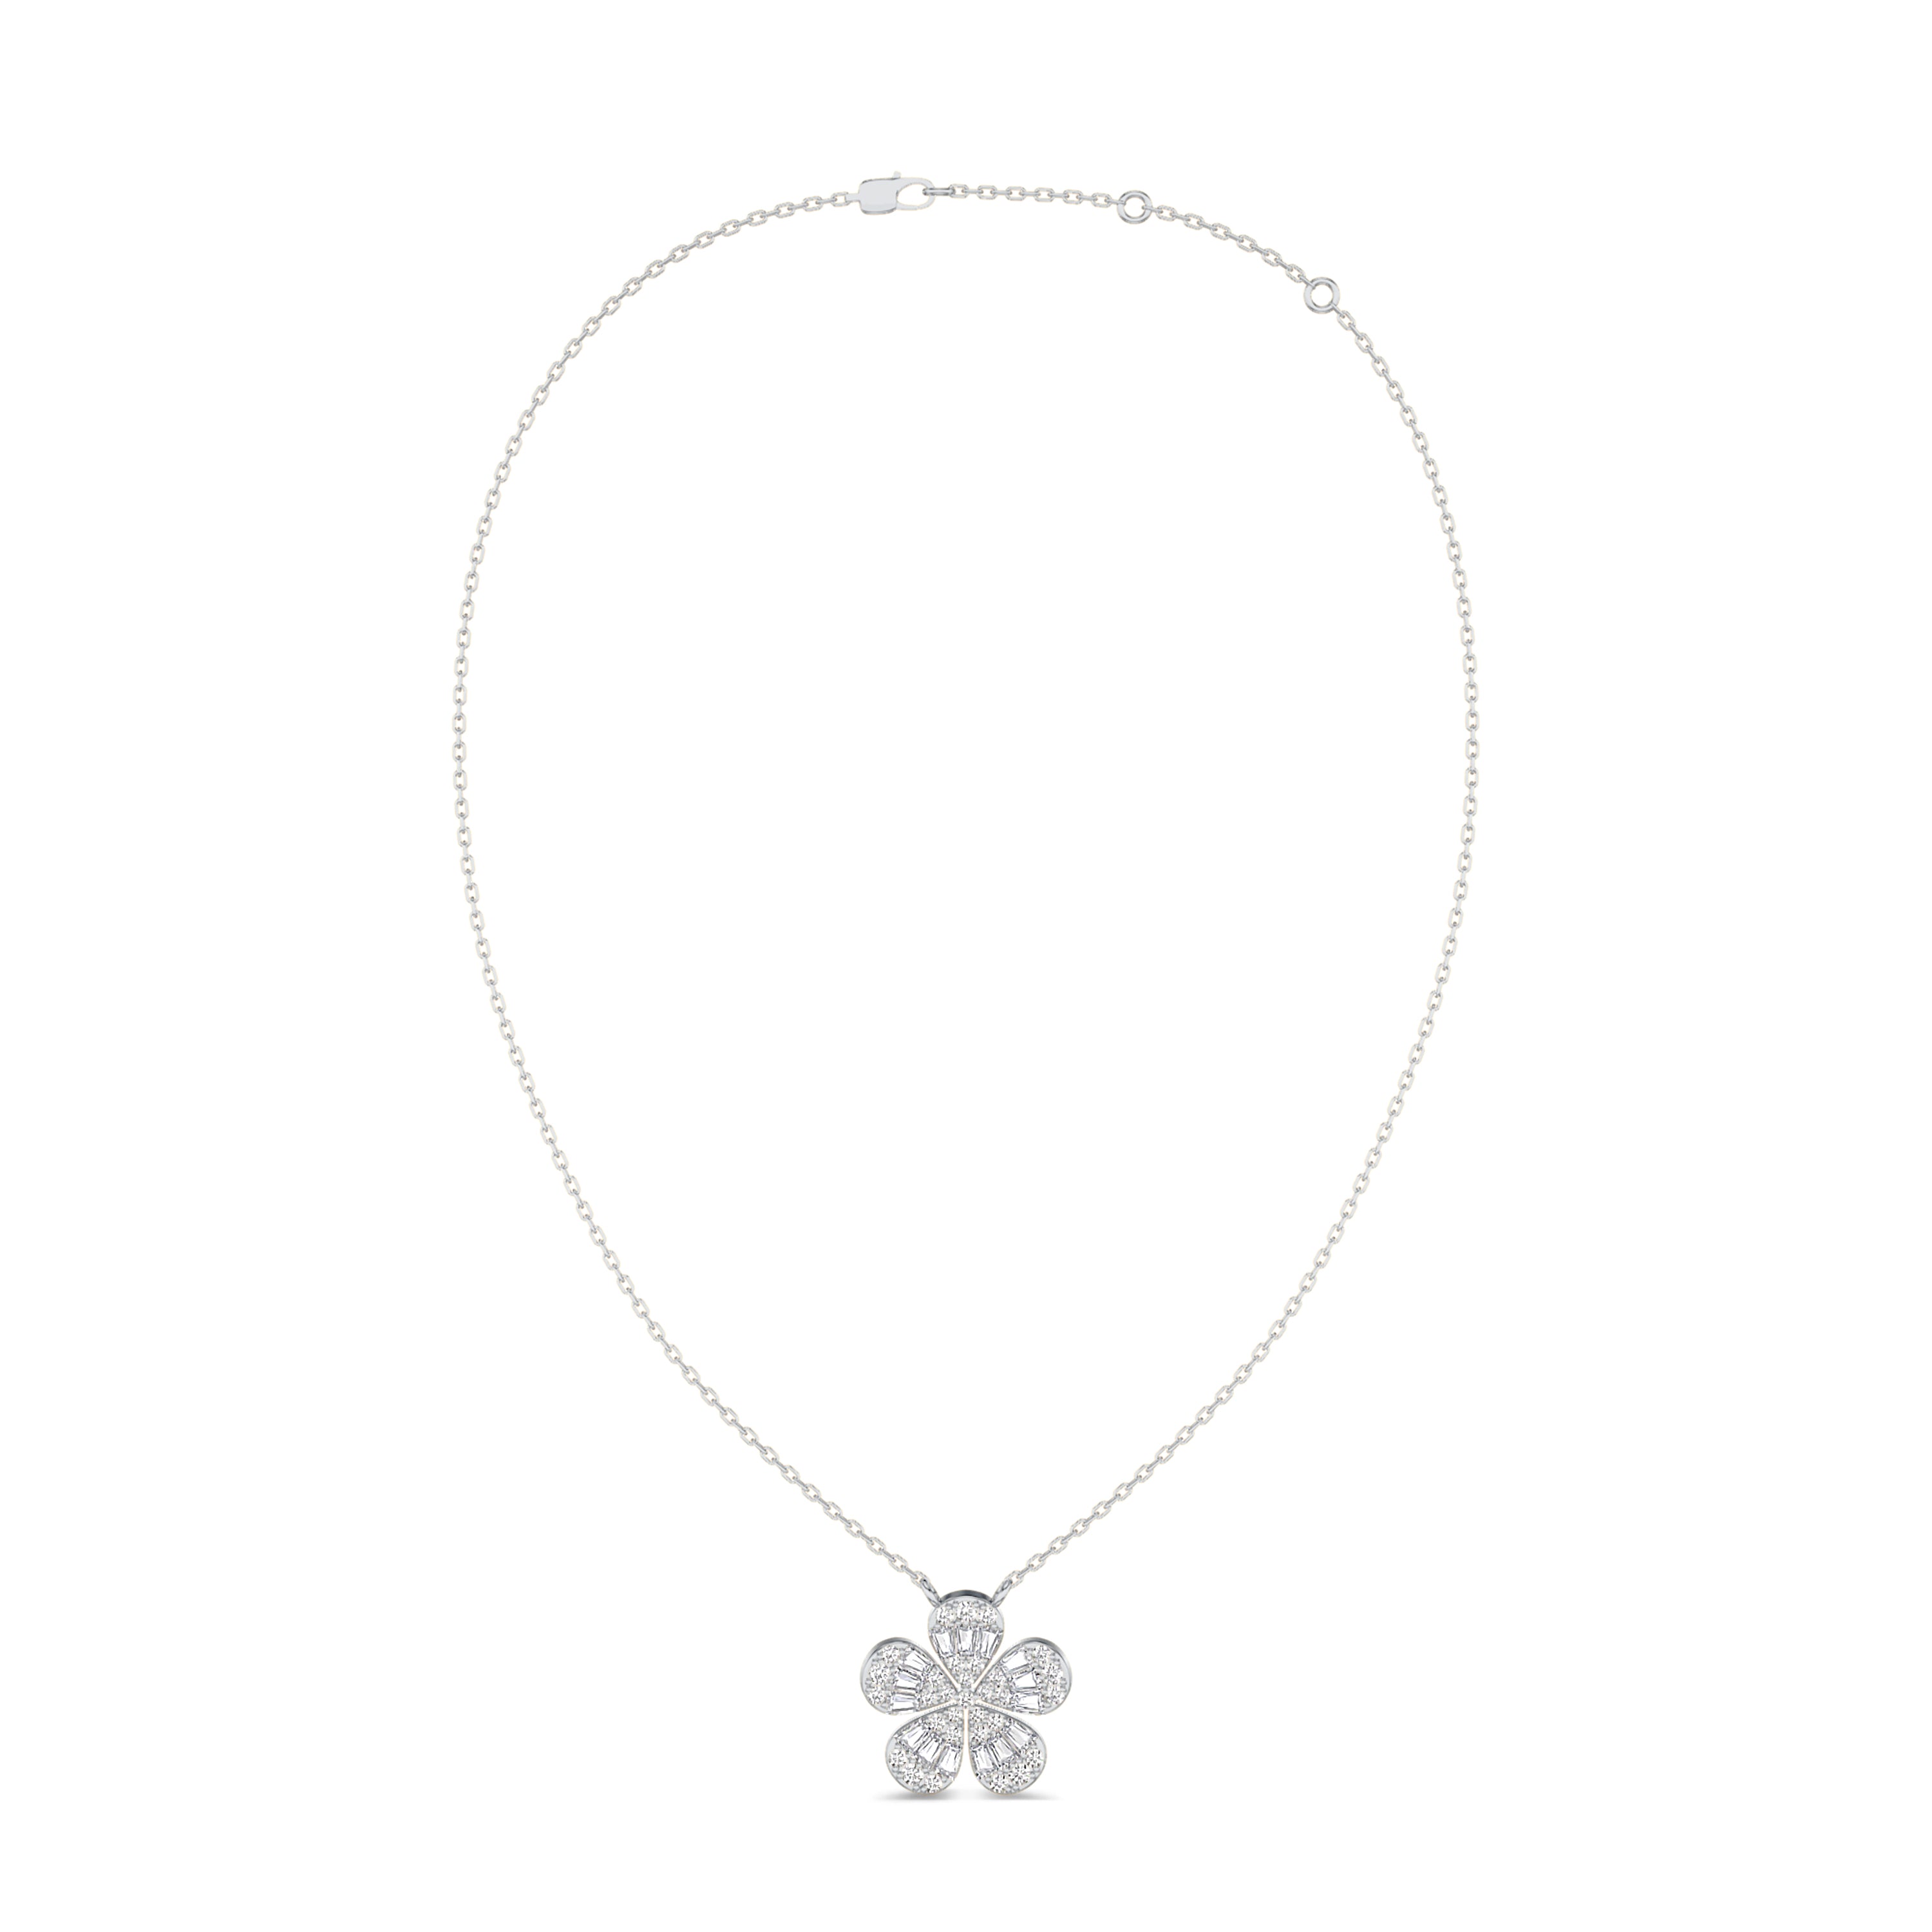 Flower diamond necklace in 0.48 carats, FG color, VS-SI clarity, 18k white gold